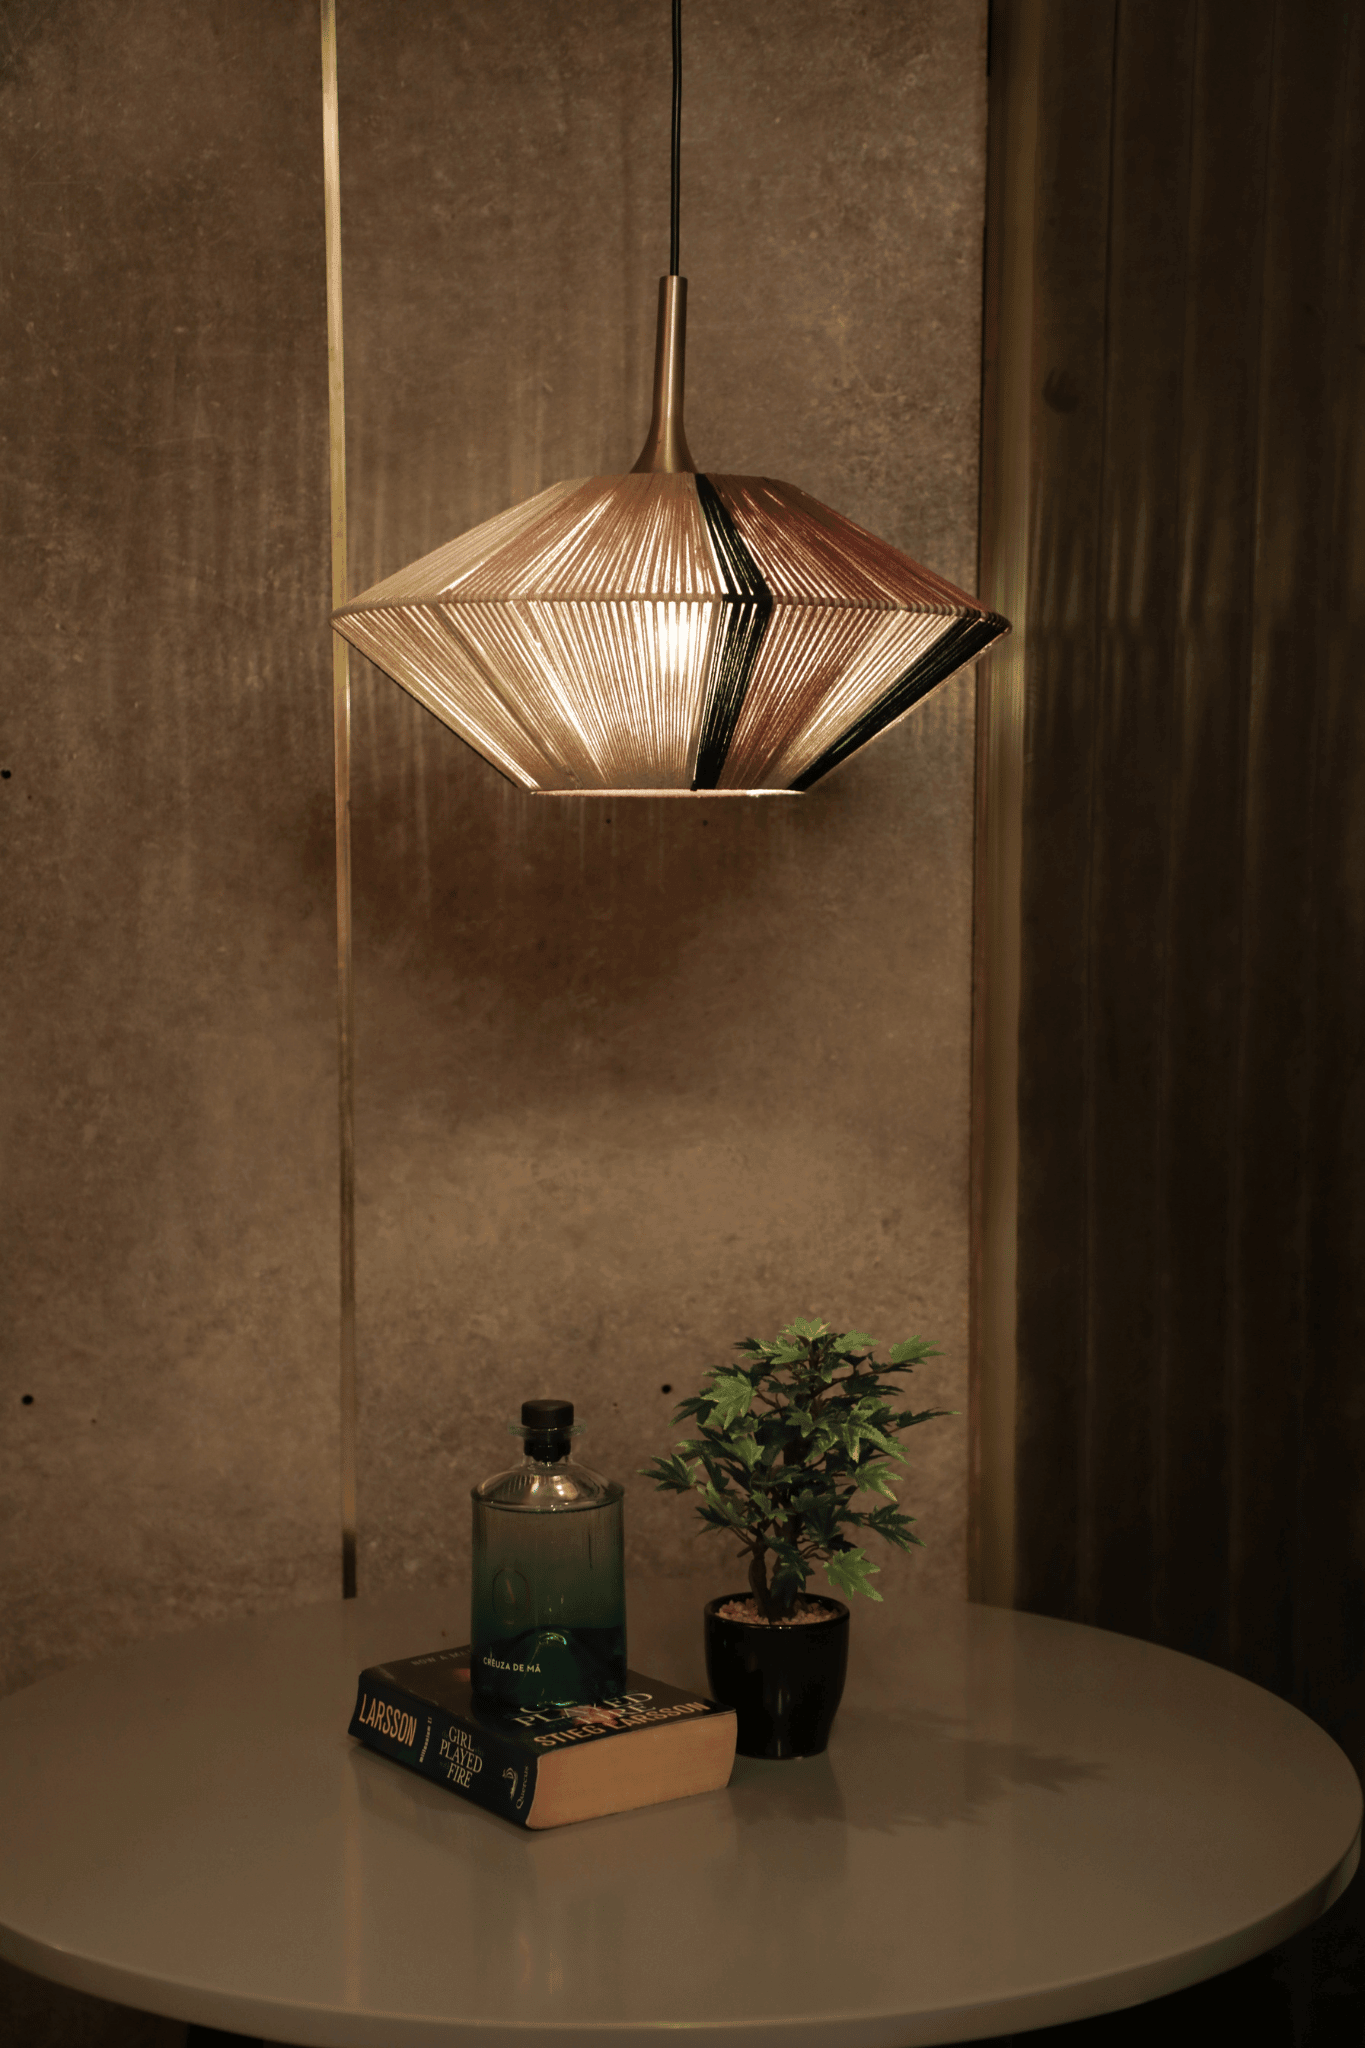 Inzio Handcrafted Pendant Light by The Light Library